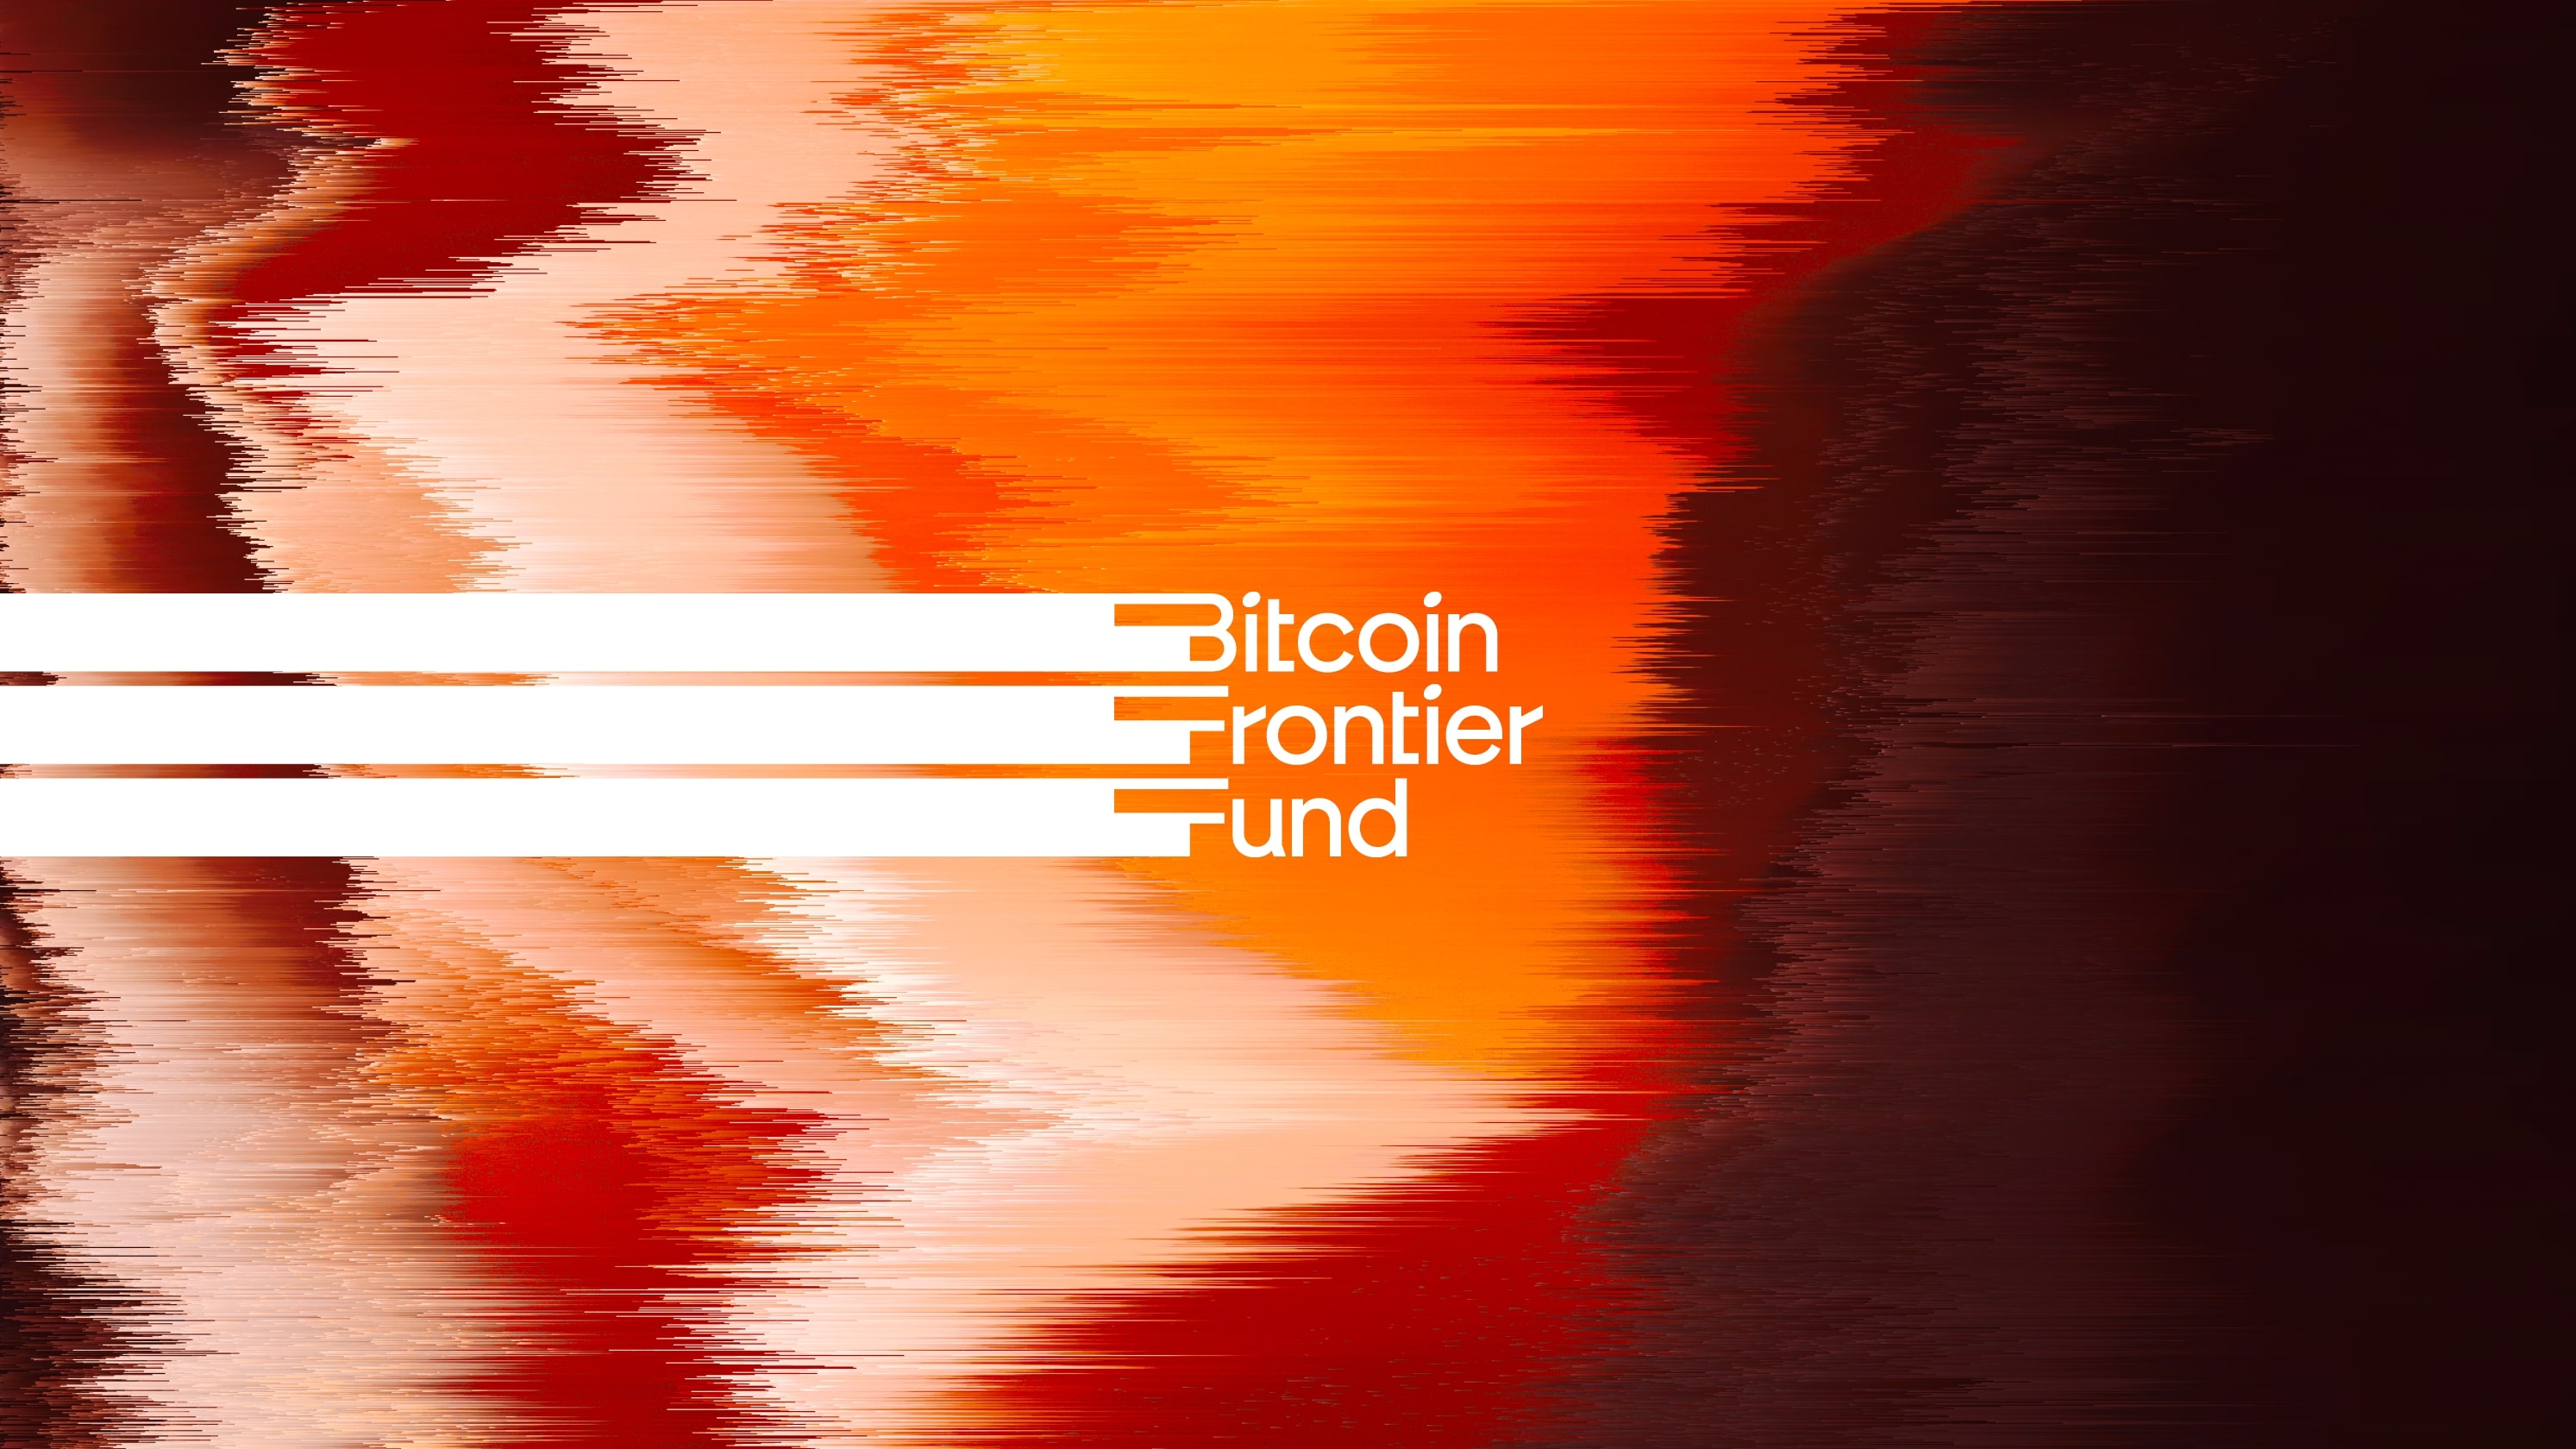 Dawn Creates Identity and Branding for Bitcoin Frontier Fund